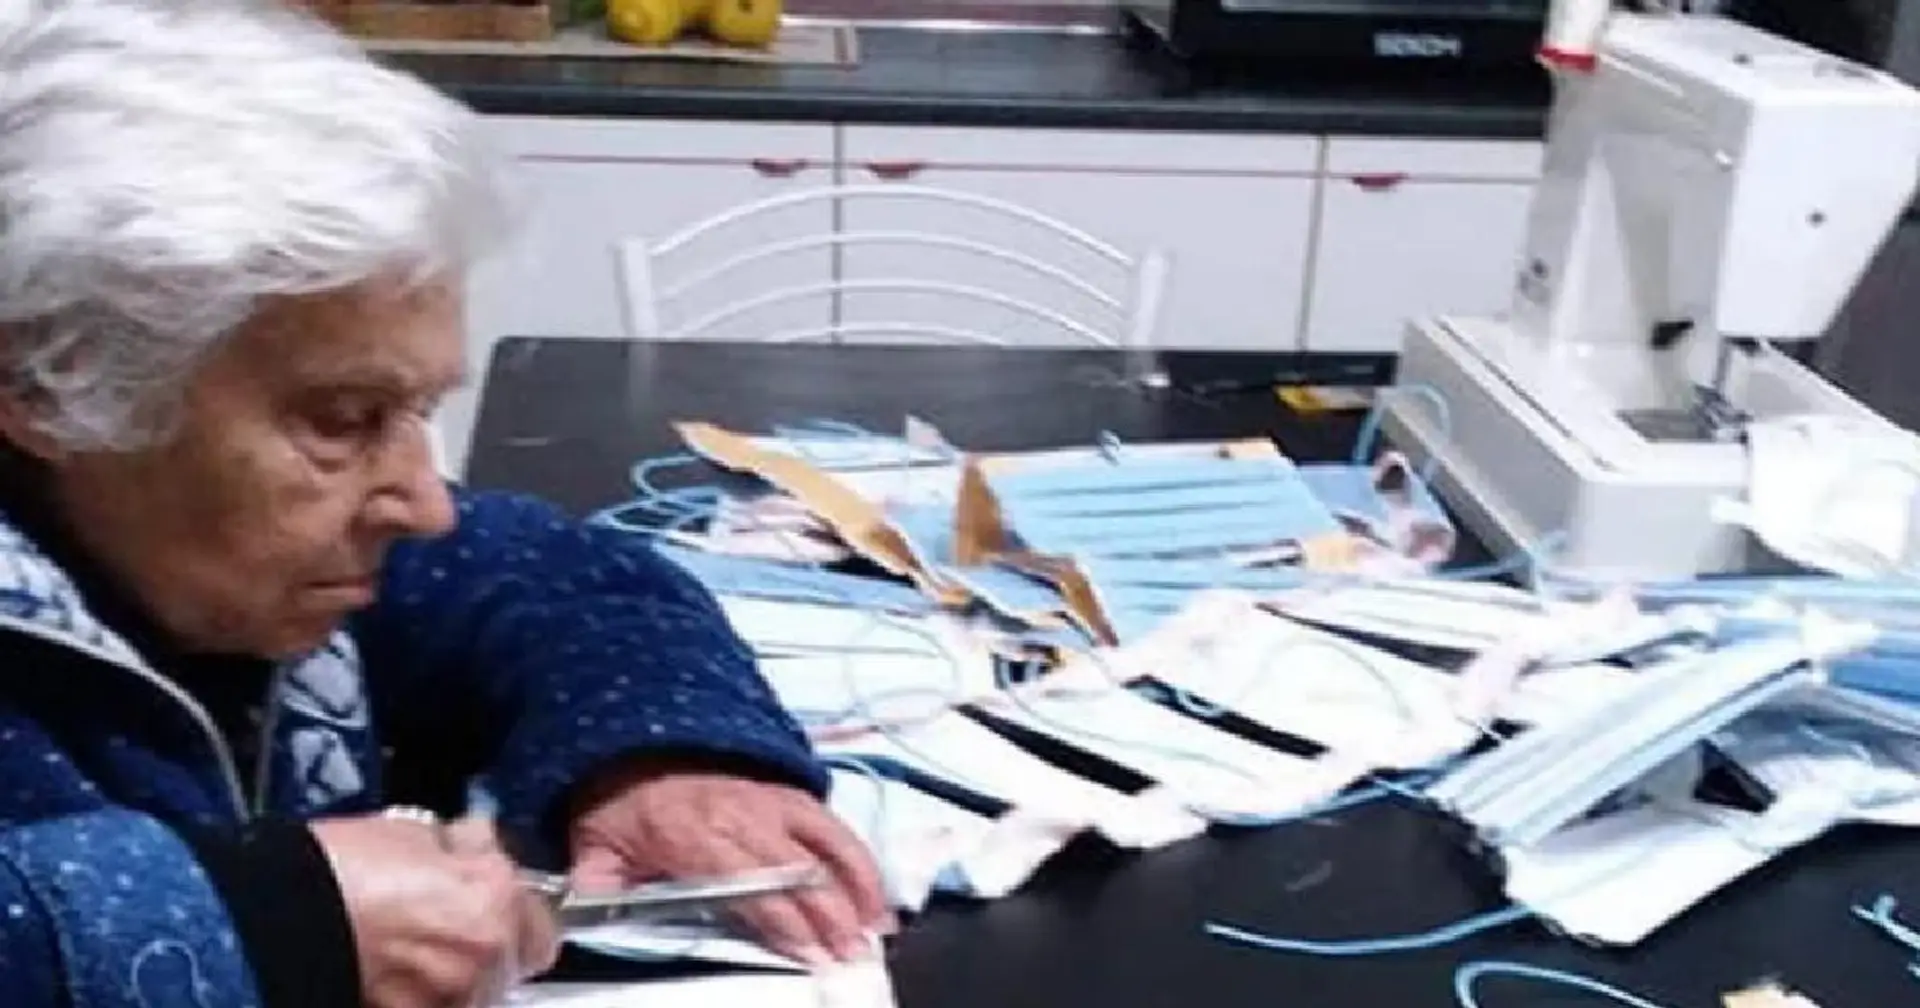 90-year-old woman in Naples makes 700 masks per night by hand for healthcare workers 